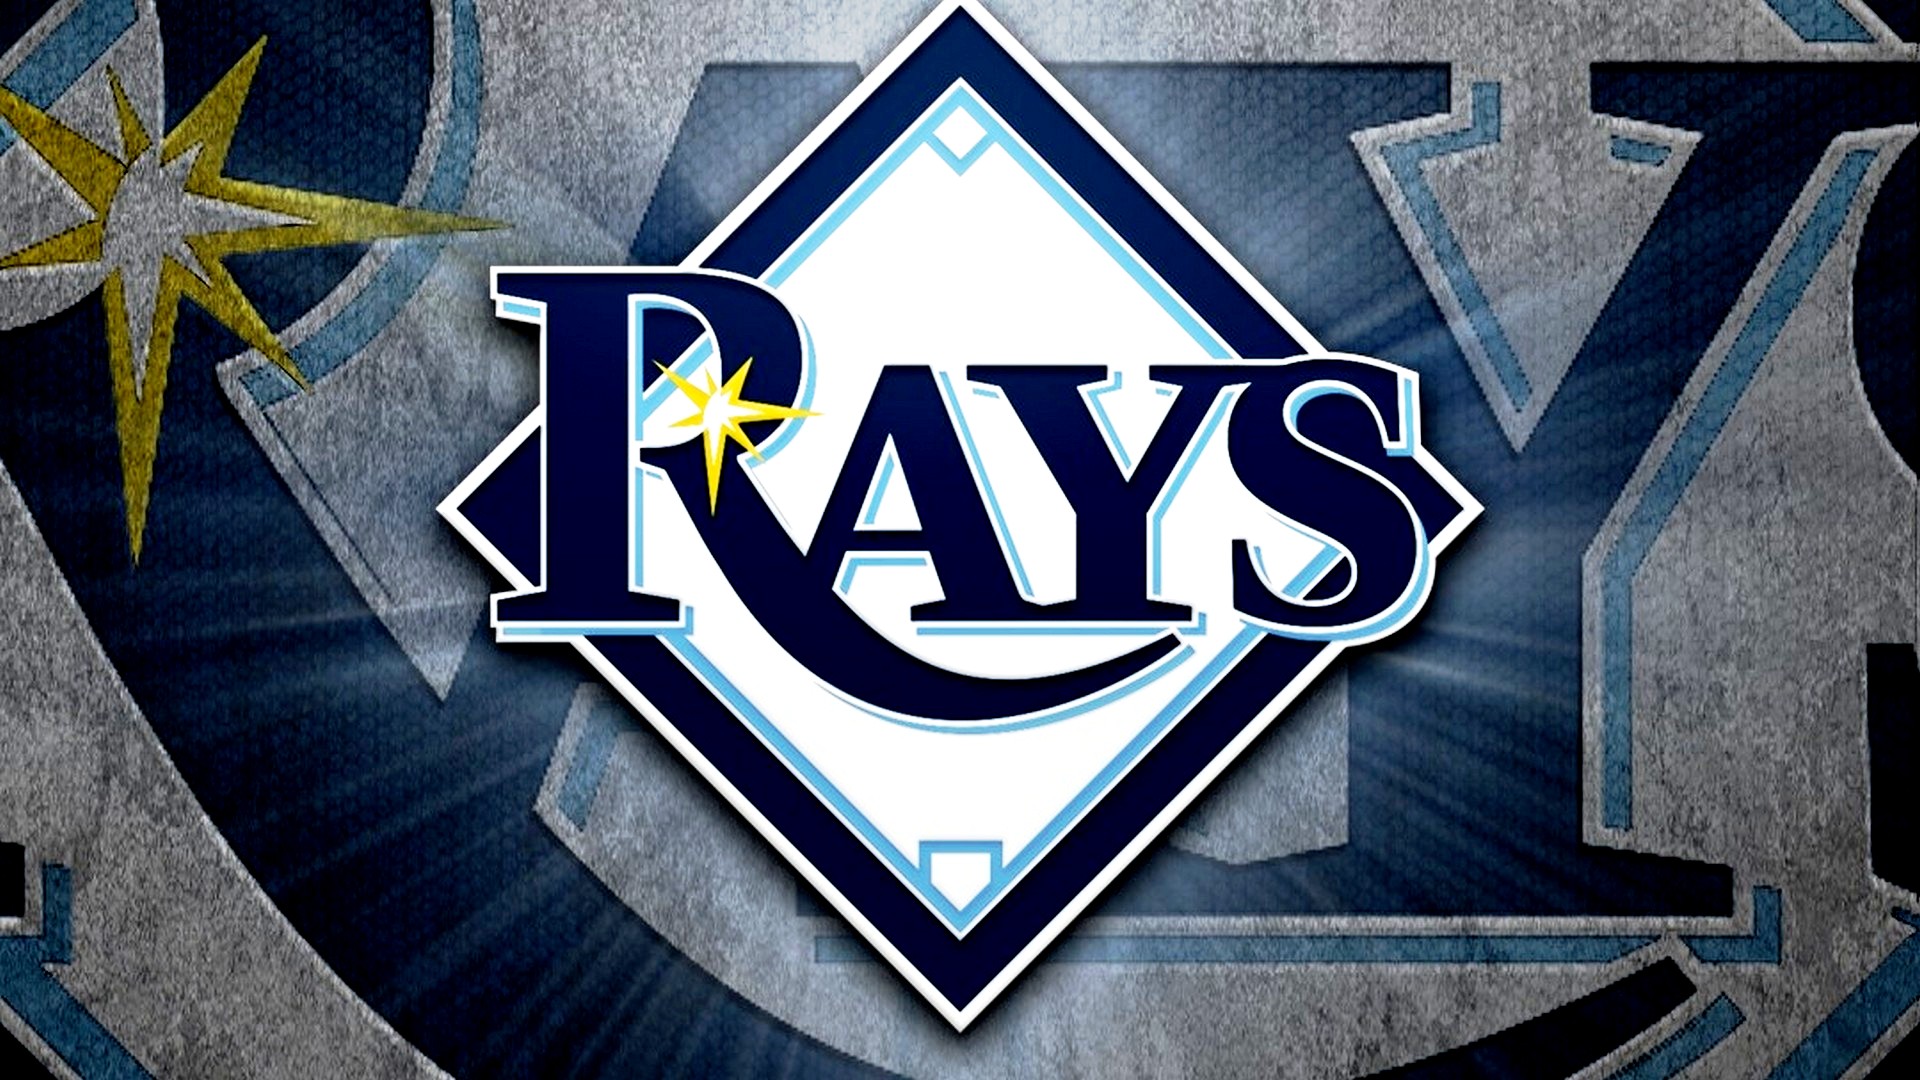 PC Wallpaper Tampa Bay Rays Logo with high-resolution 1920x1080 pixel. You can use this wallpaper for Mac Desktop Wallpaper, Laptop Screensavers, Android Wallpapers, Tablet or iPhone Home Screen and another mobile phone device